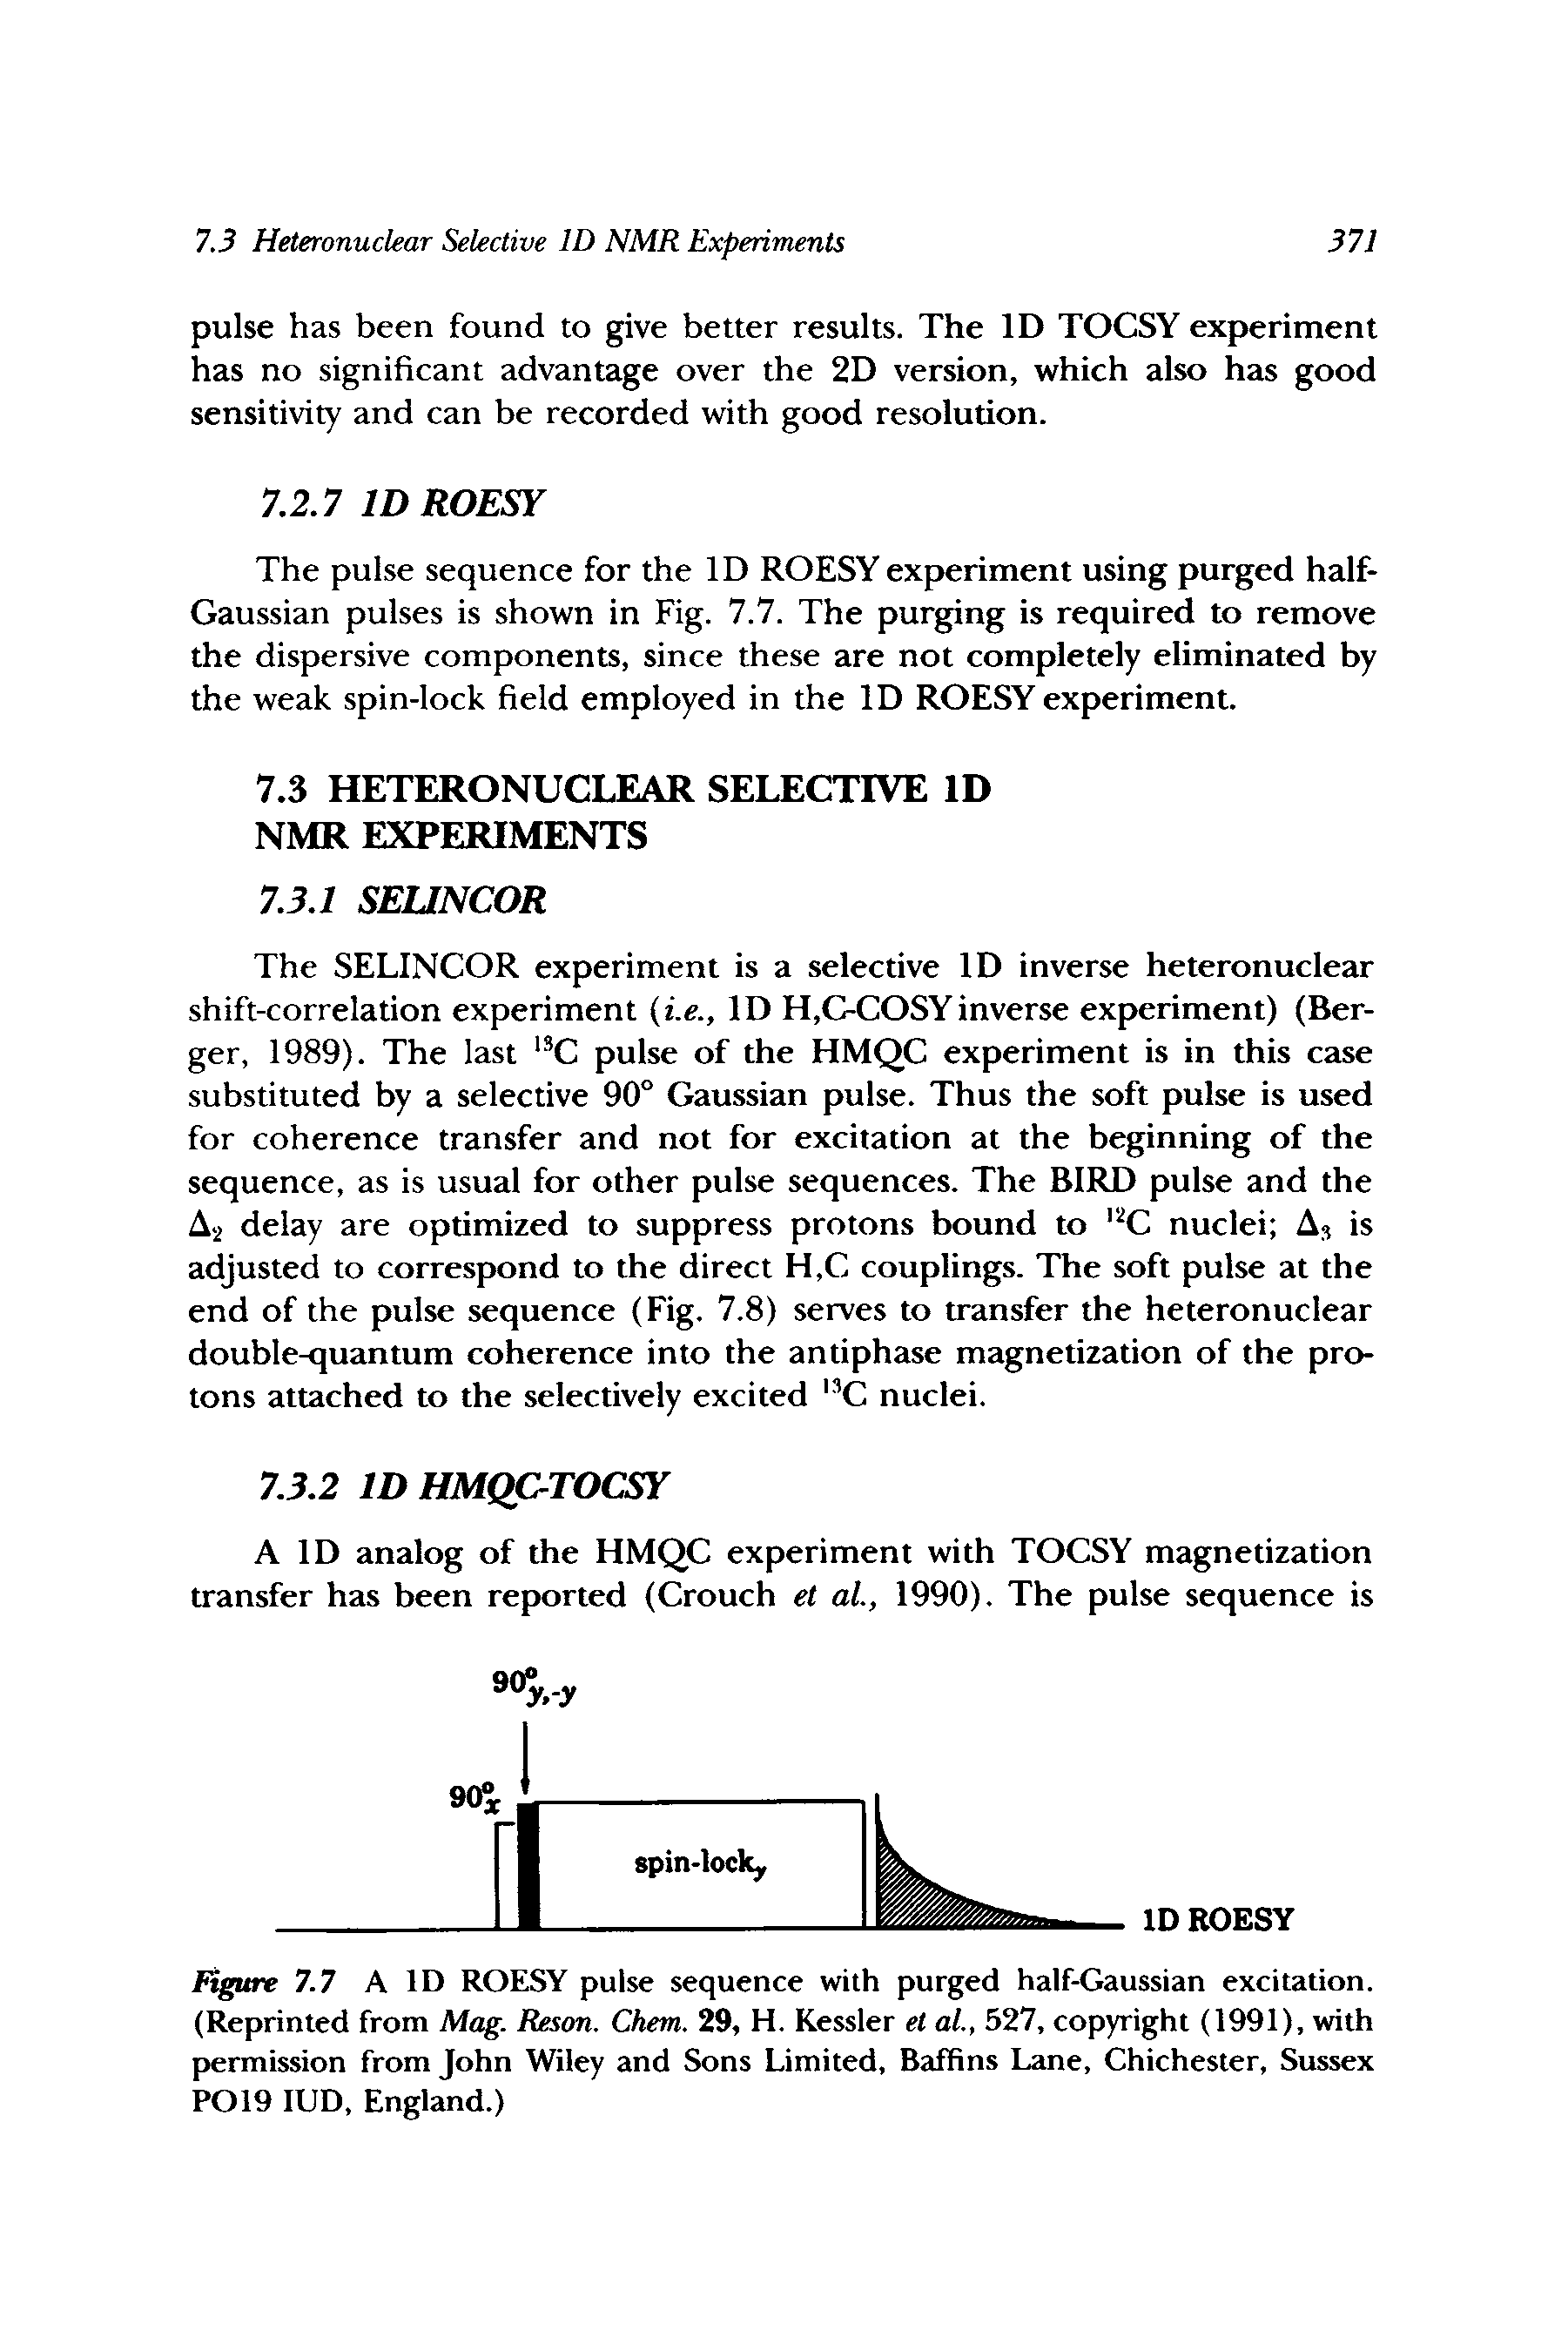 Figure 7.7 A ID ROESY pulse sequence with purged half-Gaussian excitation. (Reprinted from Mag. Reson. Chem. 29, H. Kessler et al., 527, copyright (1991), with permission from John Wiley and Sons Limited, Baffins Lane, Chichester, Sussex P019 lUD, England.)...